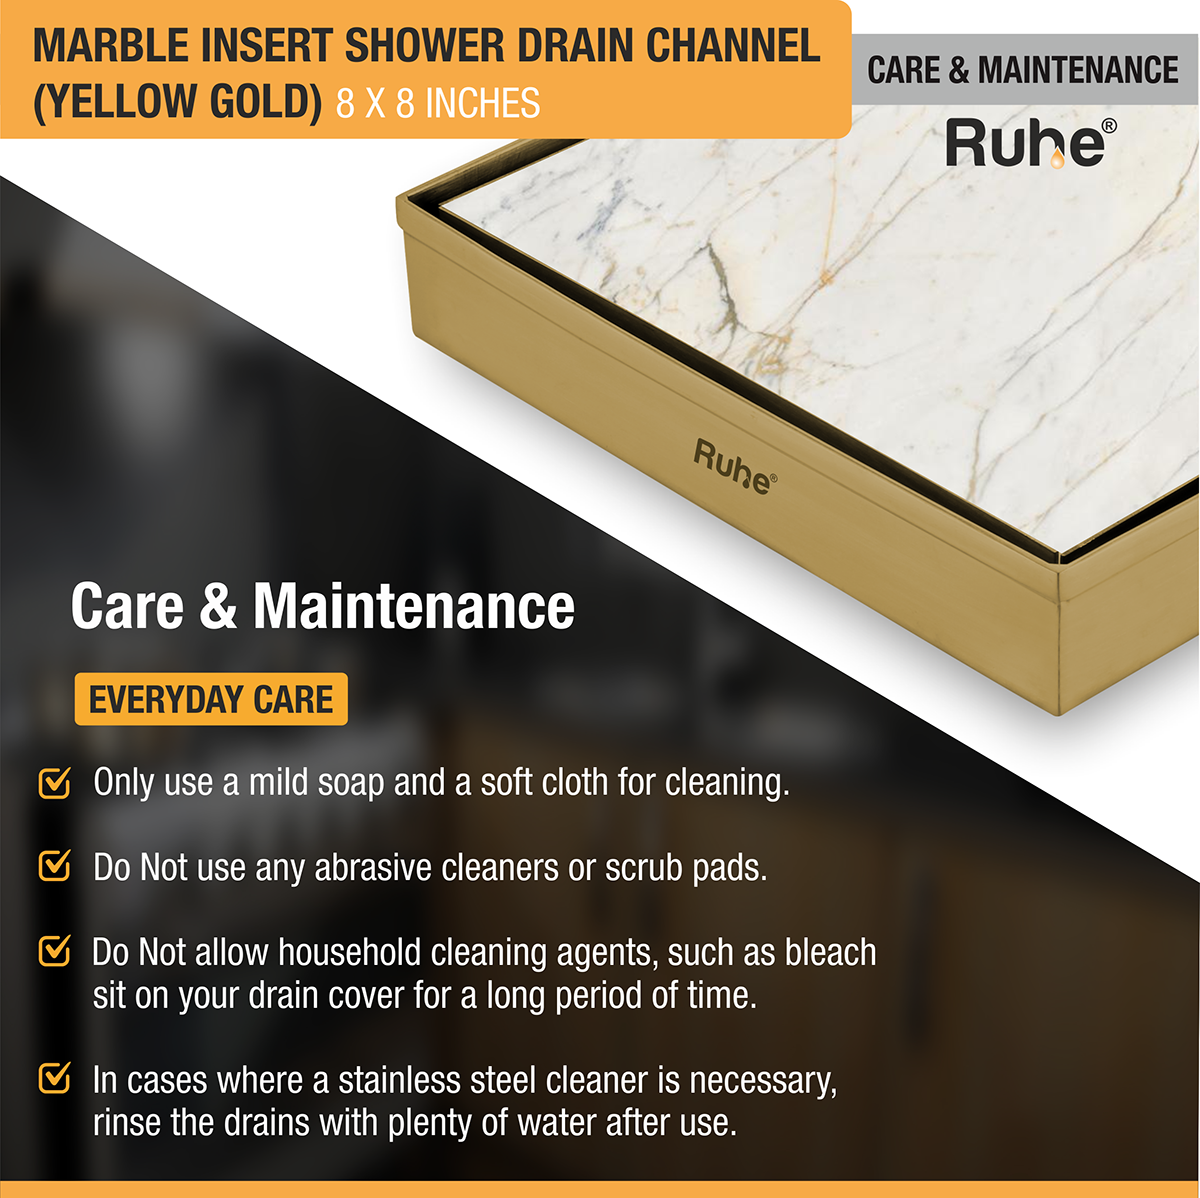 Marble Insert Shower Drain Channel (8 x 8 Inches) YELLOW GOLD PVD Coated care and mainetenance